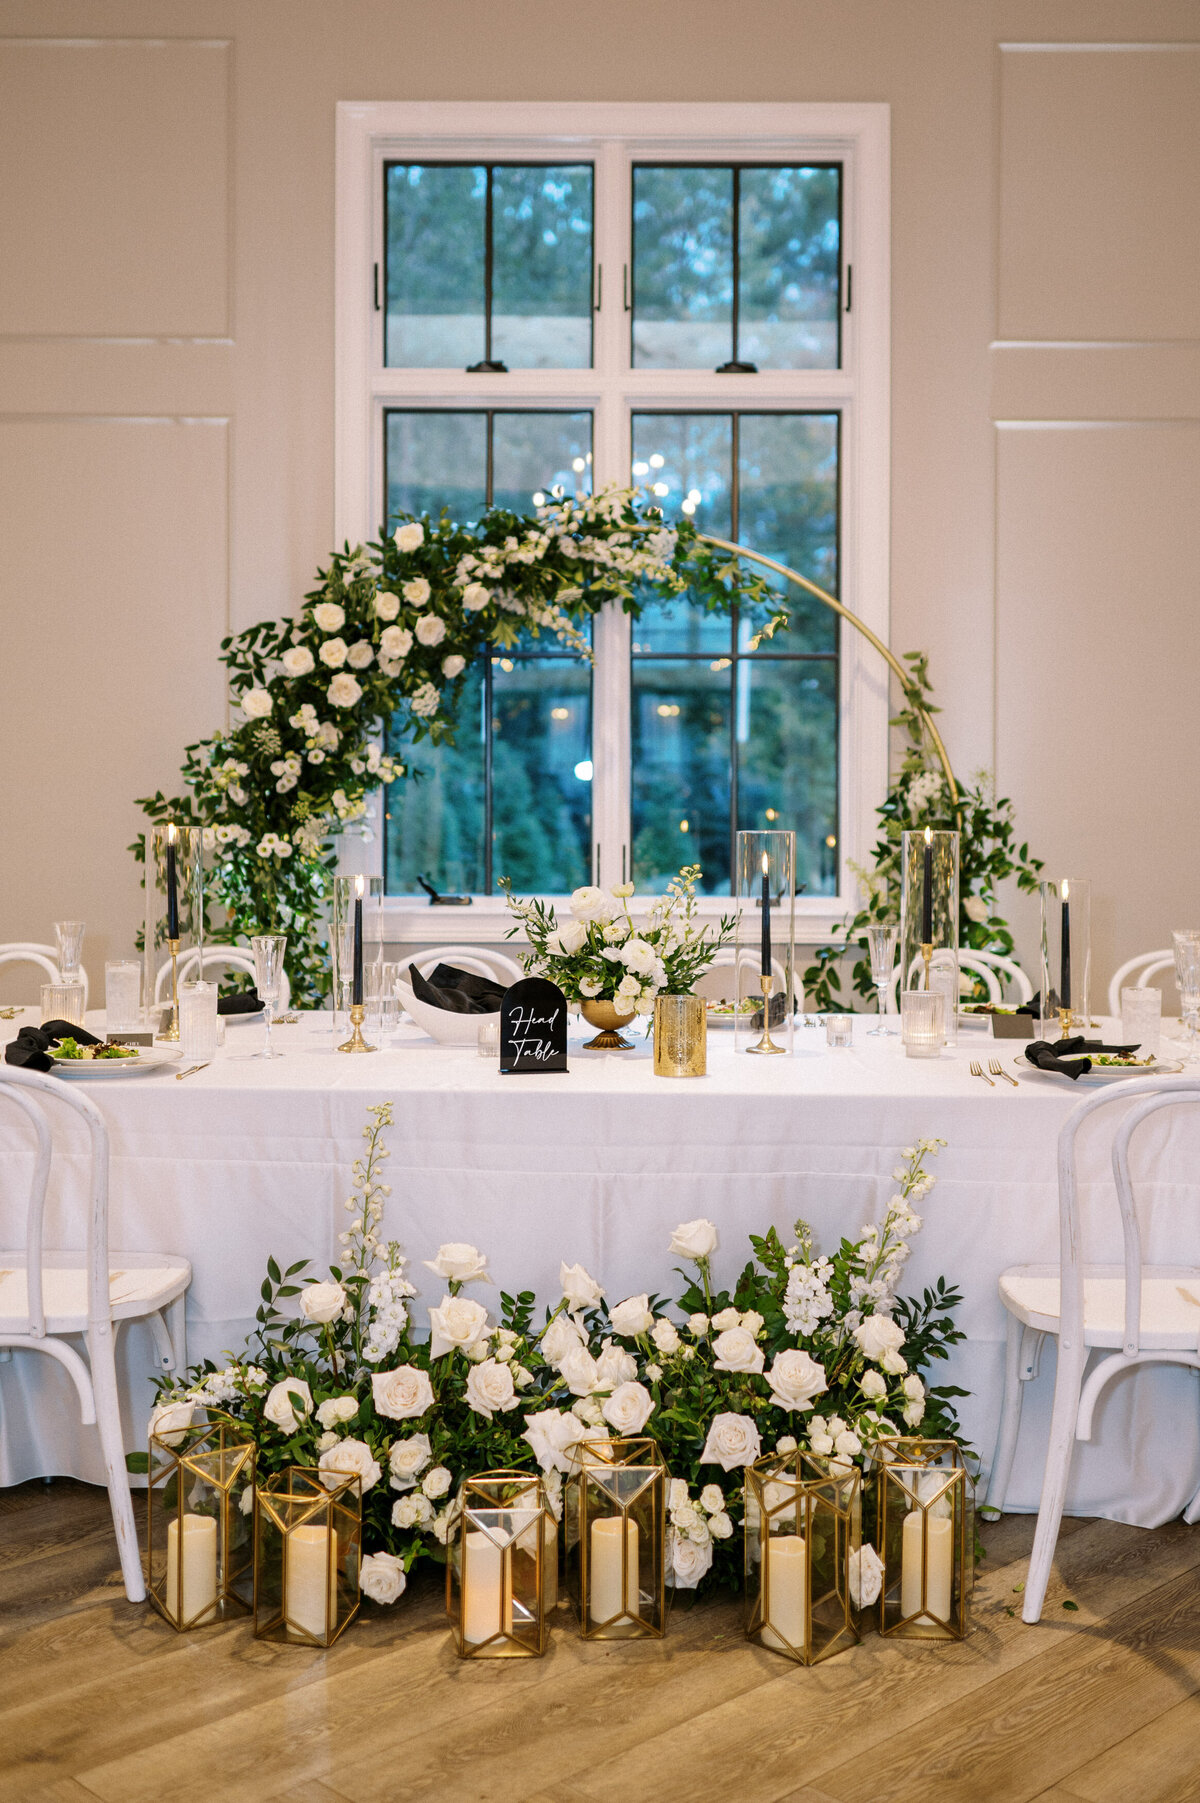 Reception details at the Bradford with florals and candles